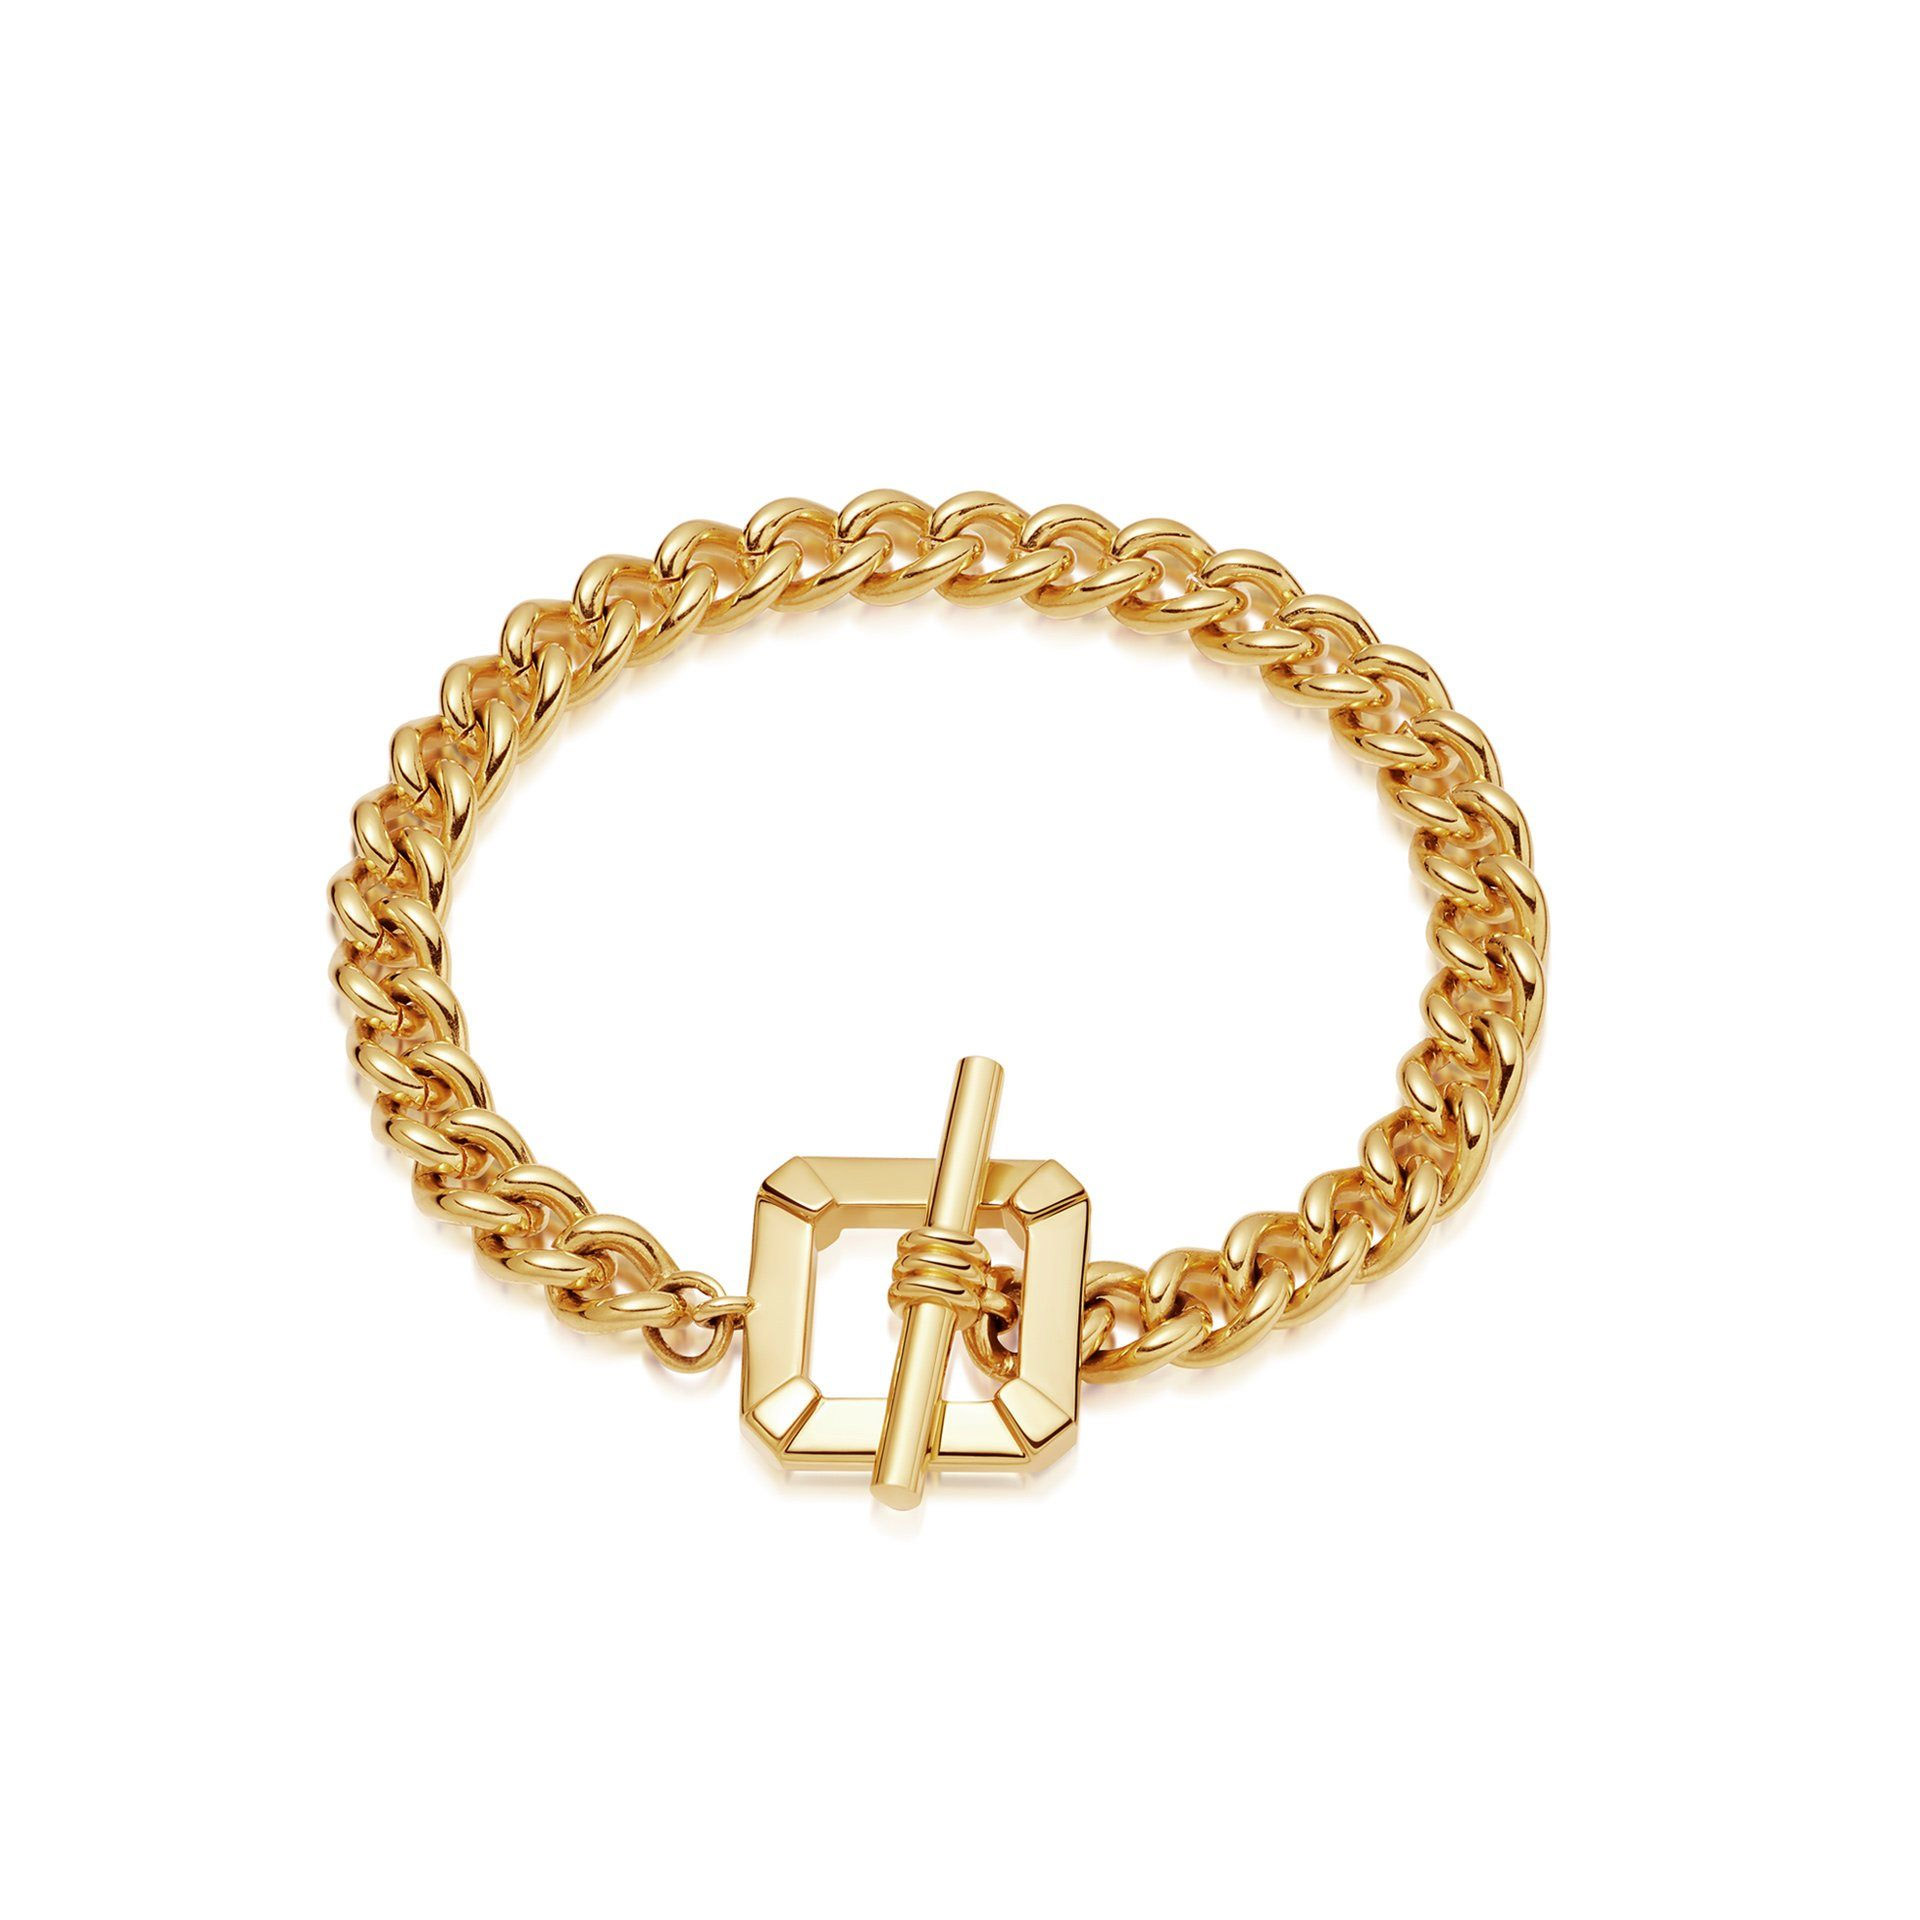 Wholesale OEM/ODM Jewelry OEM 18ct Gold Plated Chain Bracelet on Brass offer personalised custom design